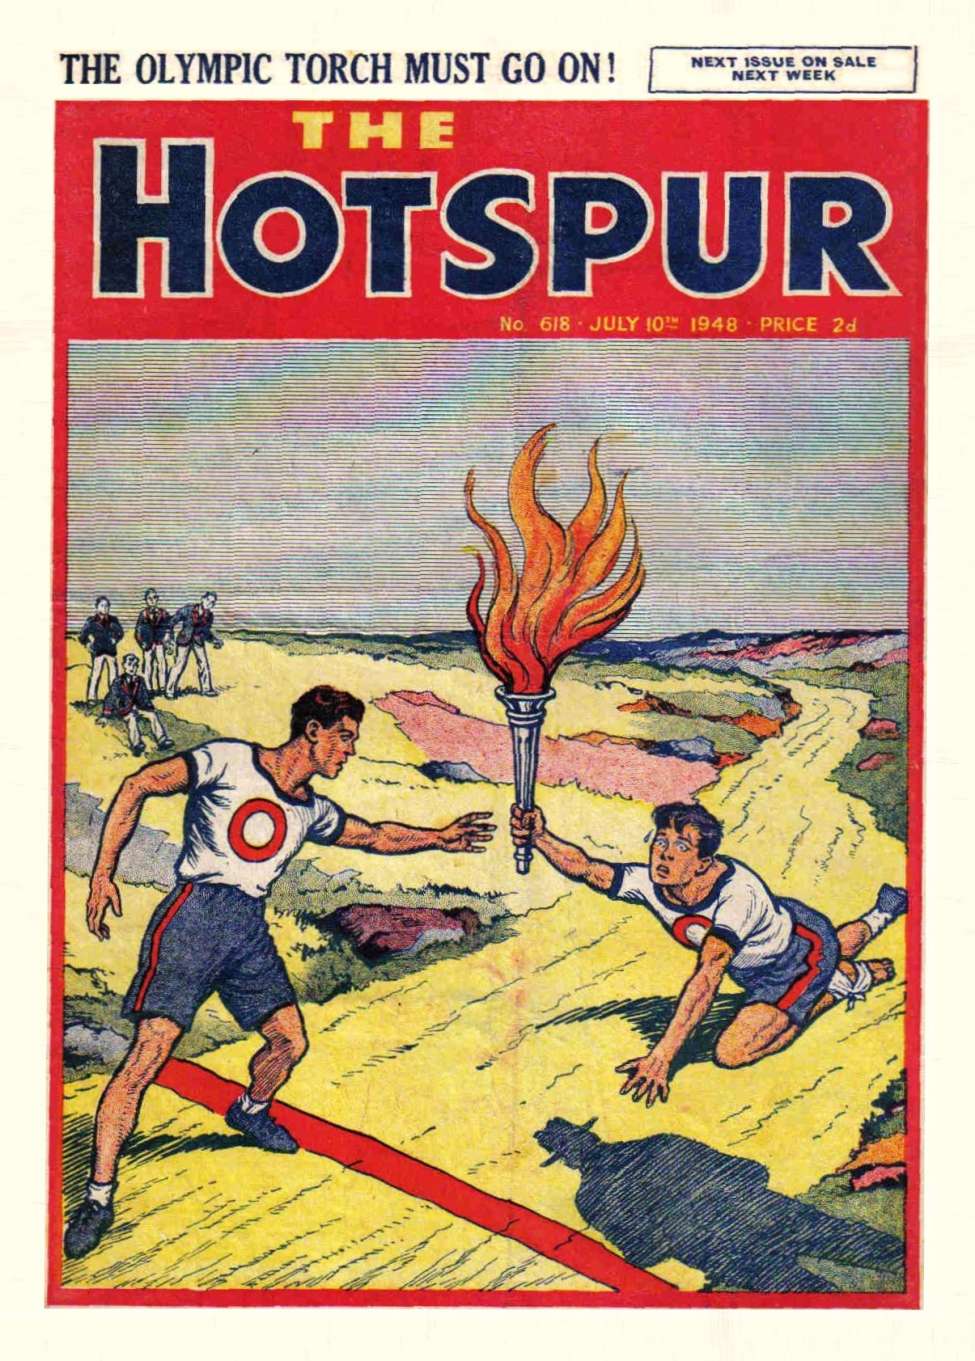 Book Cover For The Hotspur 618